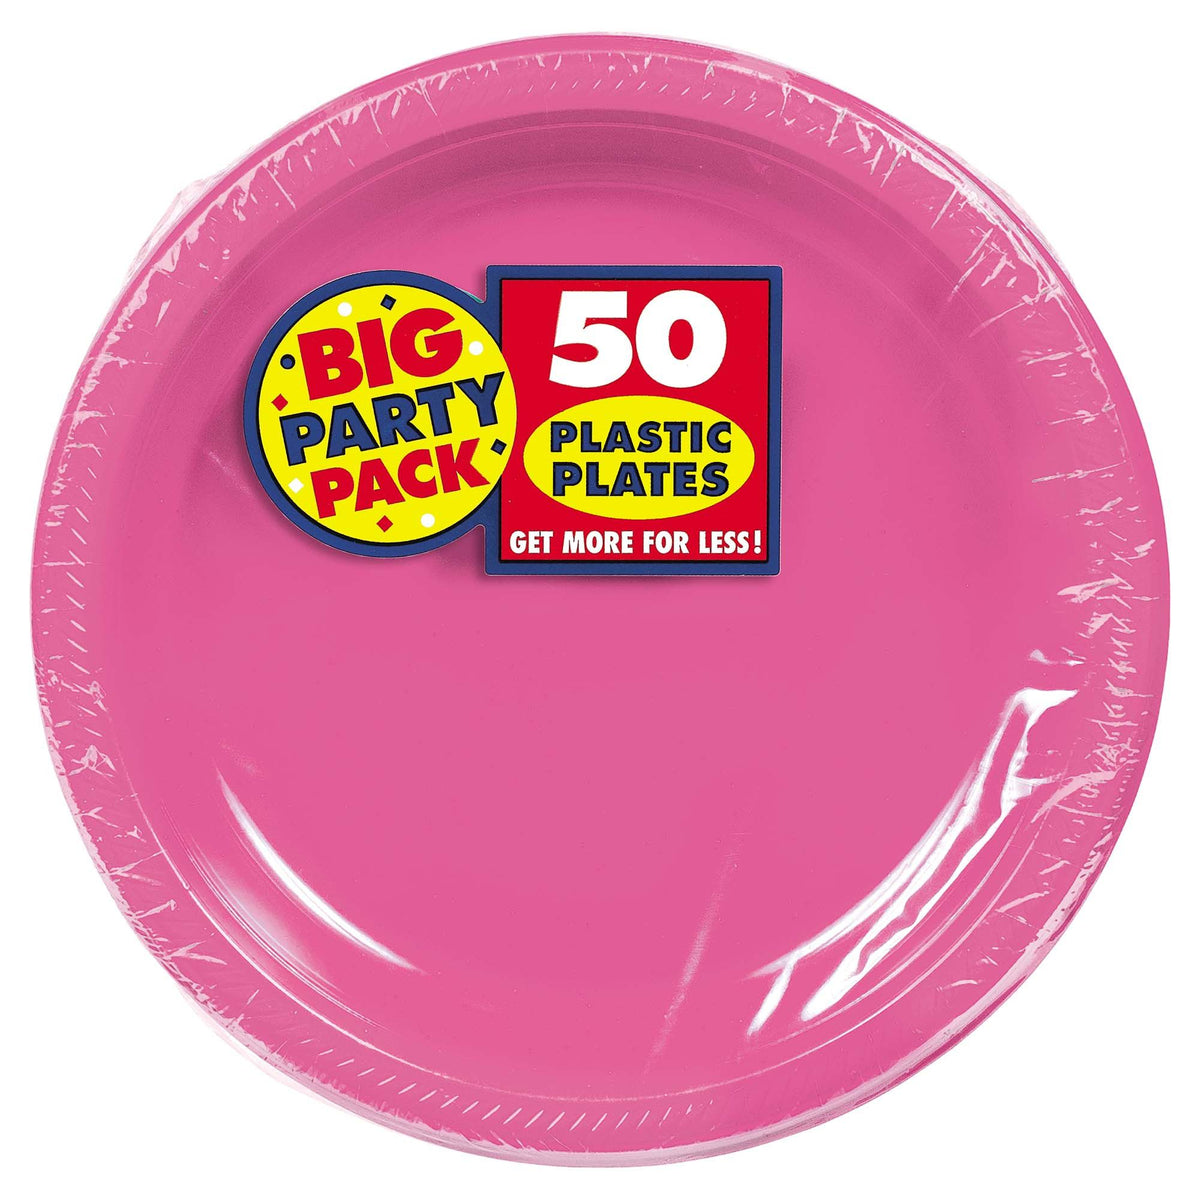 Bright Pink 10 1/4" Round Plastic Plates, 50 Count